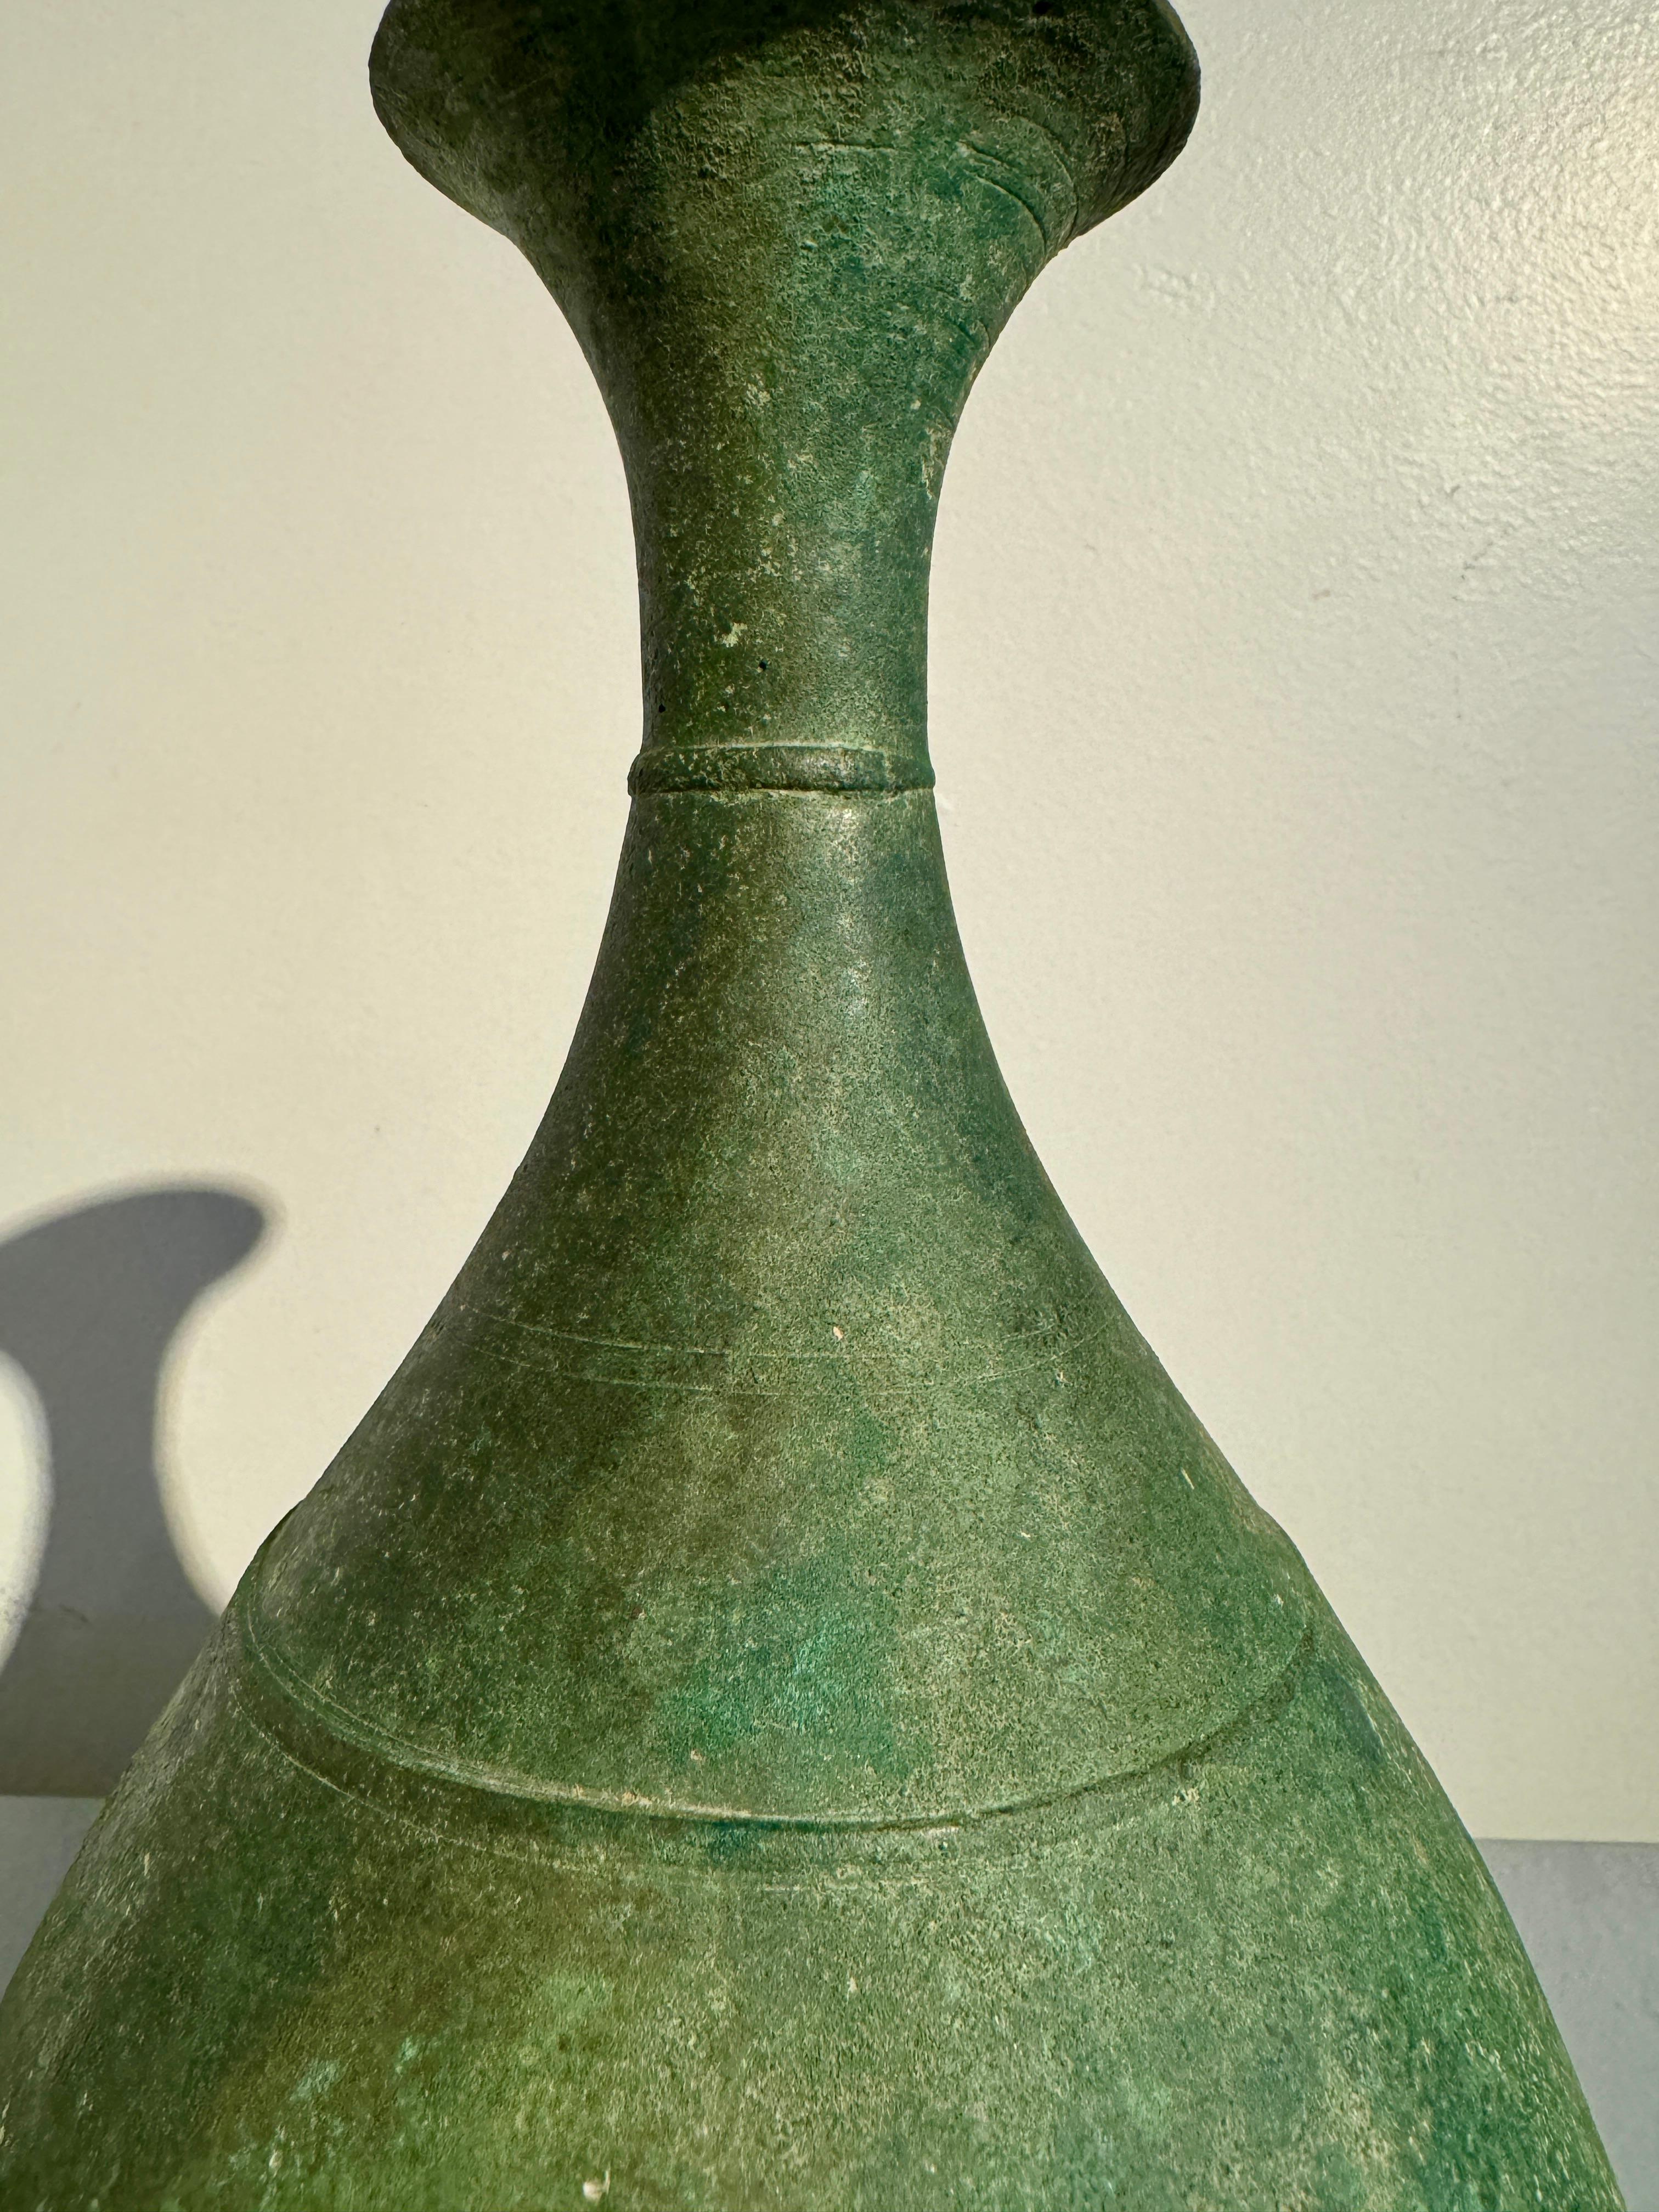 Korean Goryeo Bronze Bottle Vase with Green Patina, 12th/13th Century For Sale 6